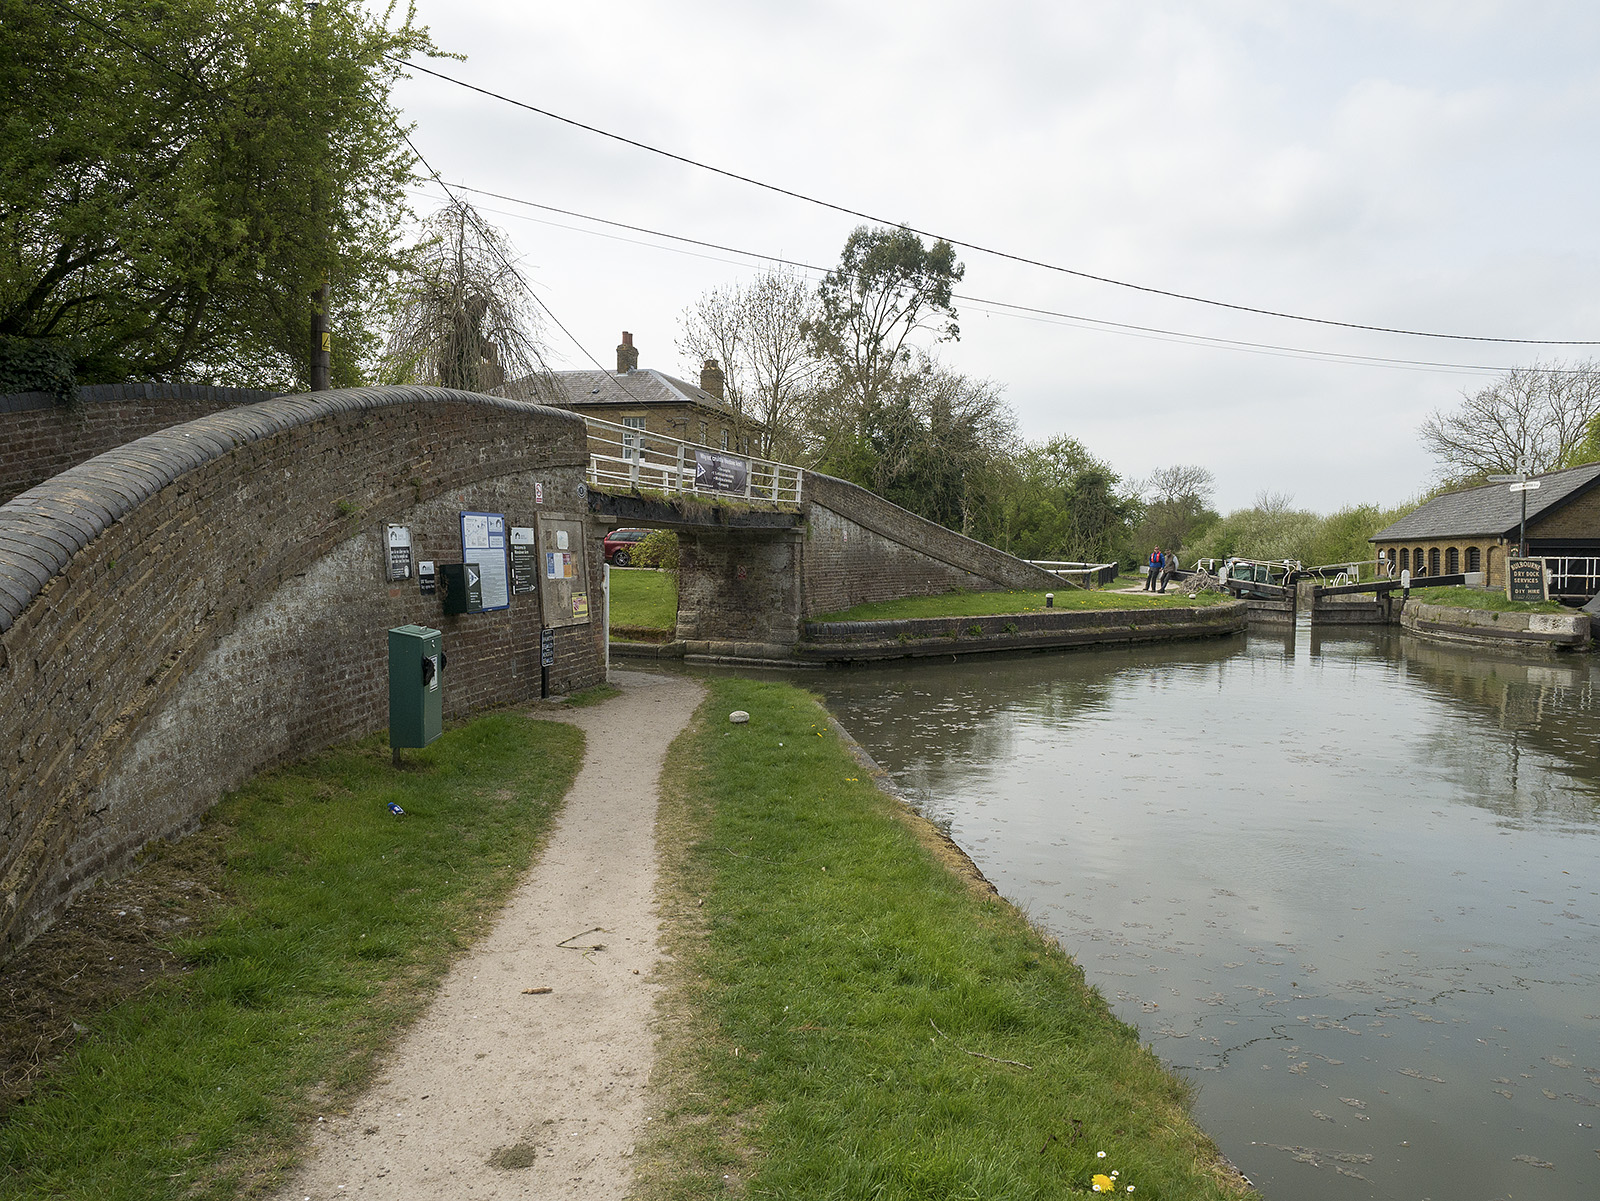 Start of the Wendover Arm at Bulbourne junction